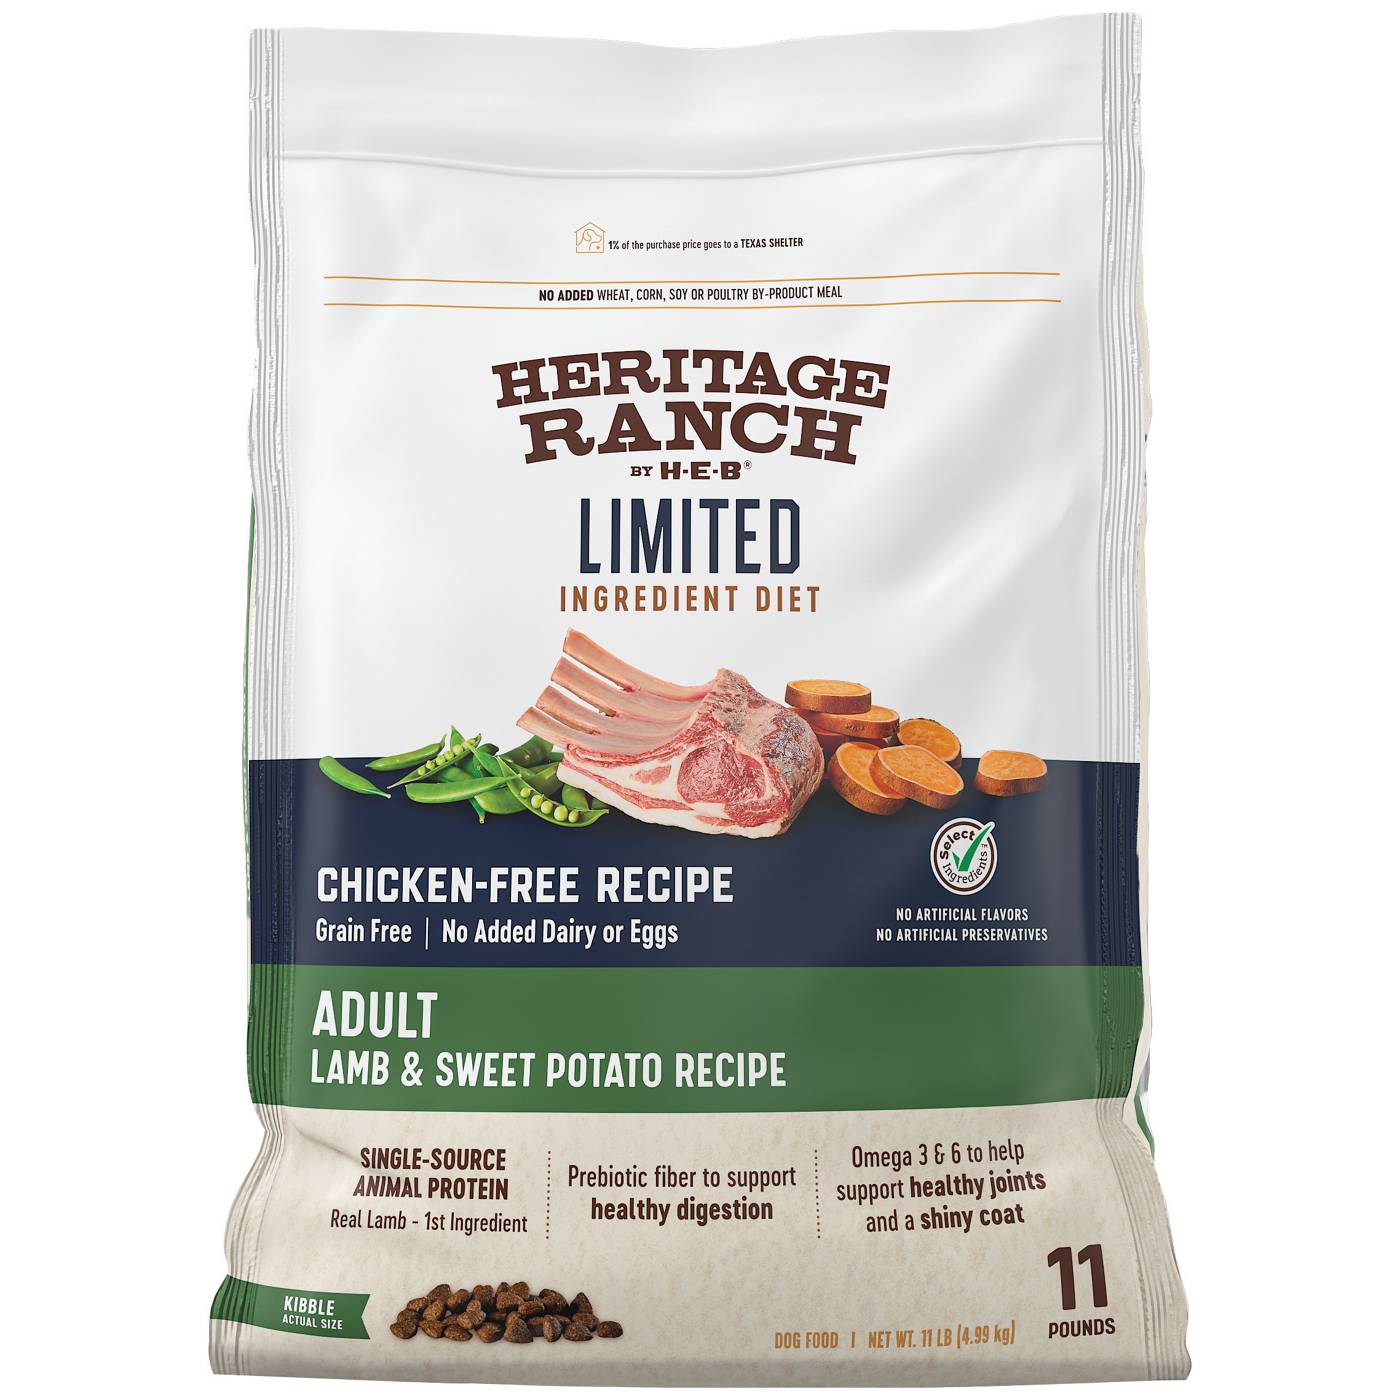 Heritage Ranch by H-E-B Limited Ingredient Diet Grain-Free Adult Dry Dog Food - Lamb & Sweet Potato; image 1 of 2